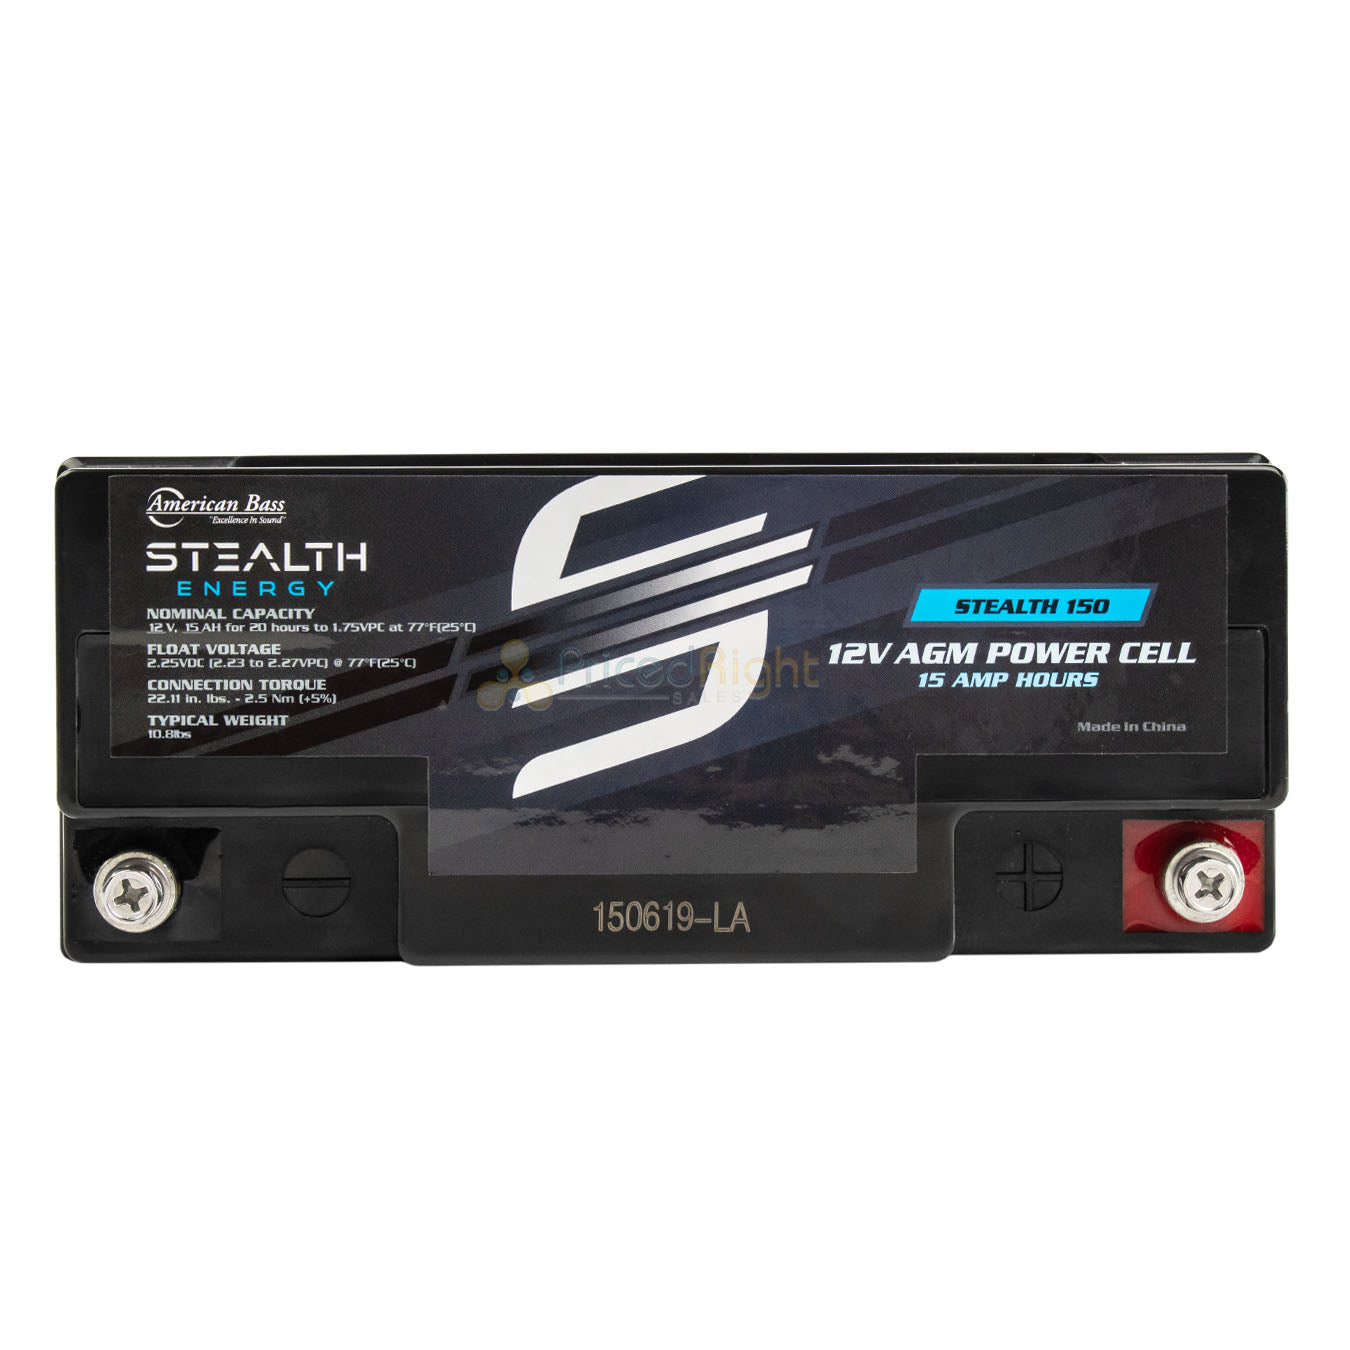 Car Audio Power Cell Battery Stealth 150 12V 15 Amp Hour Sealed American Bass